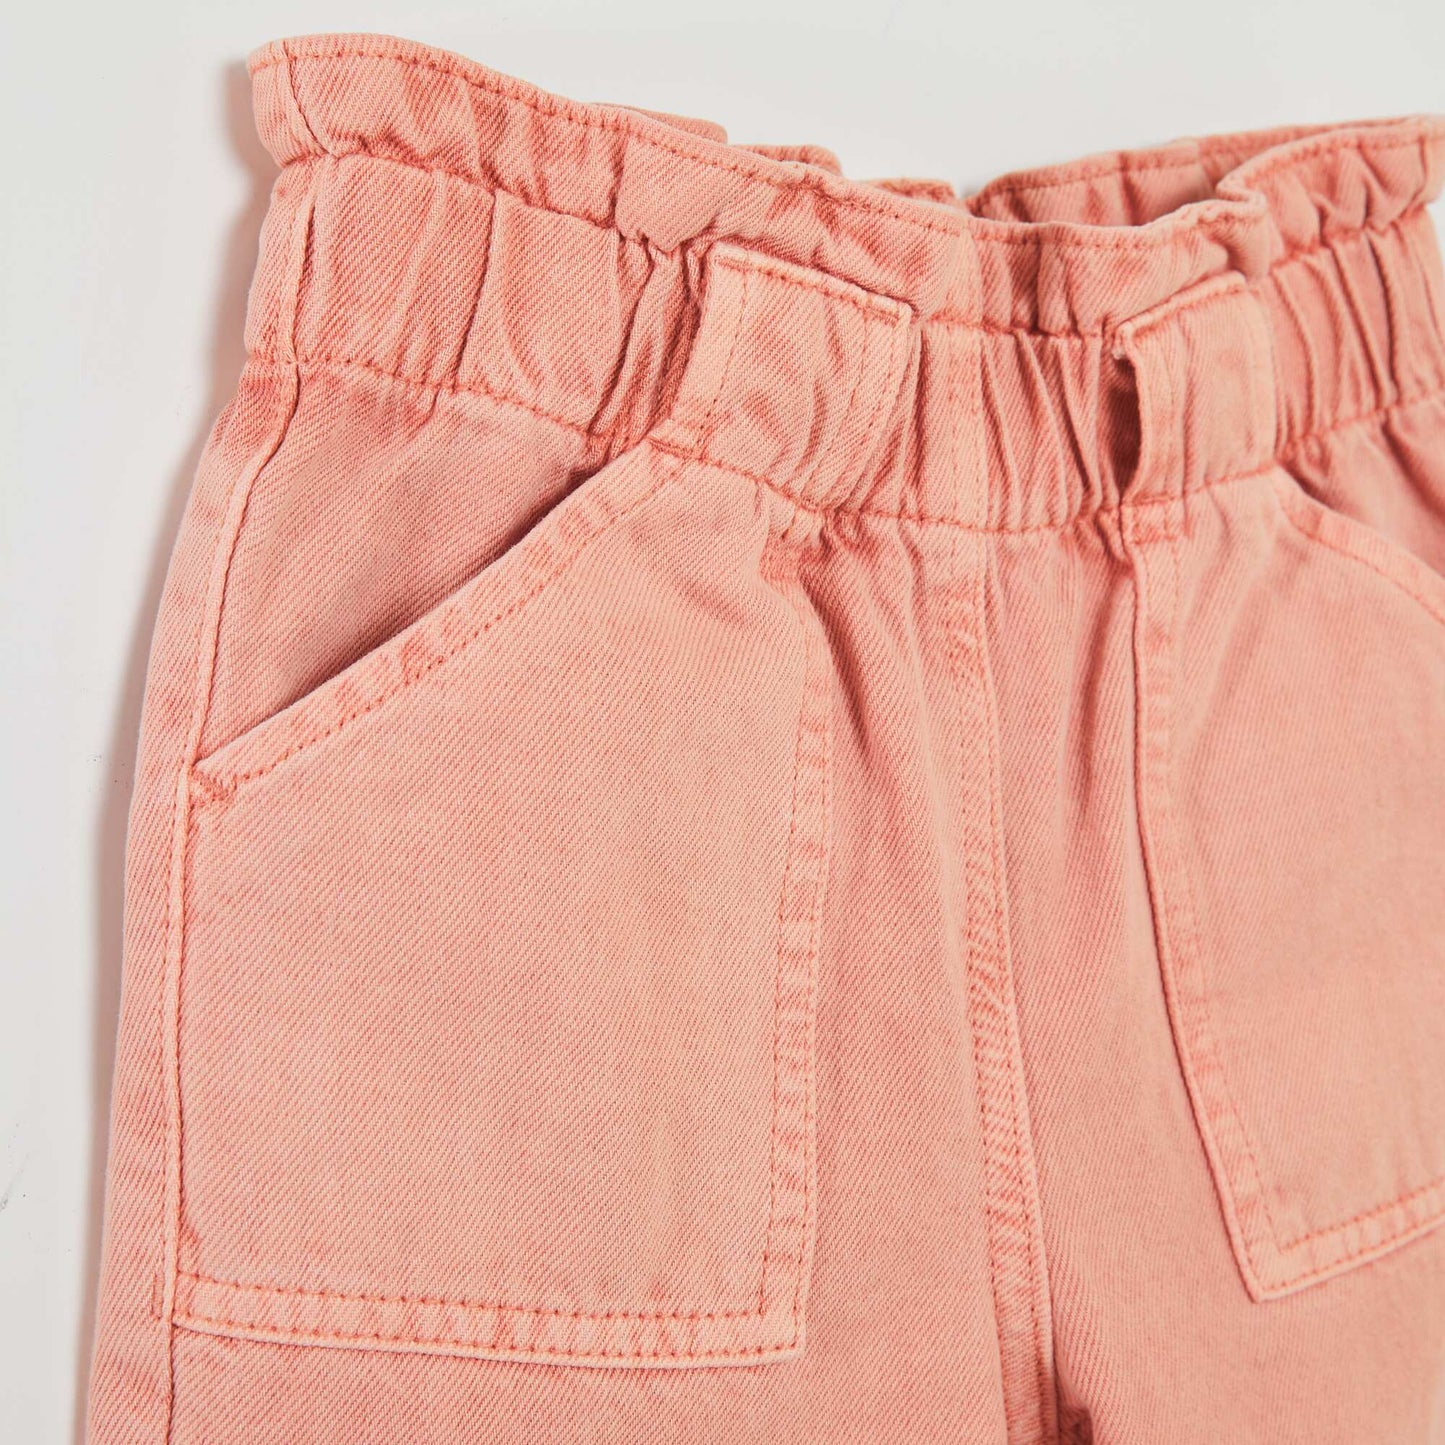 Mom jeans with belt at the waist PINK